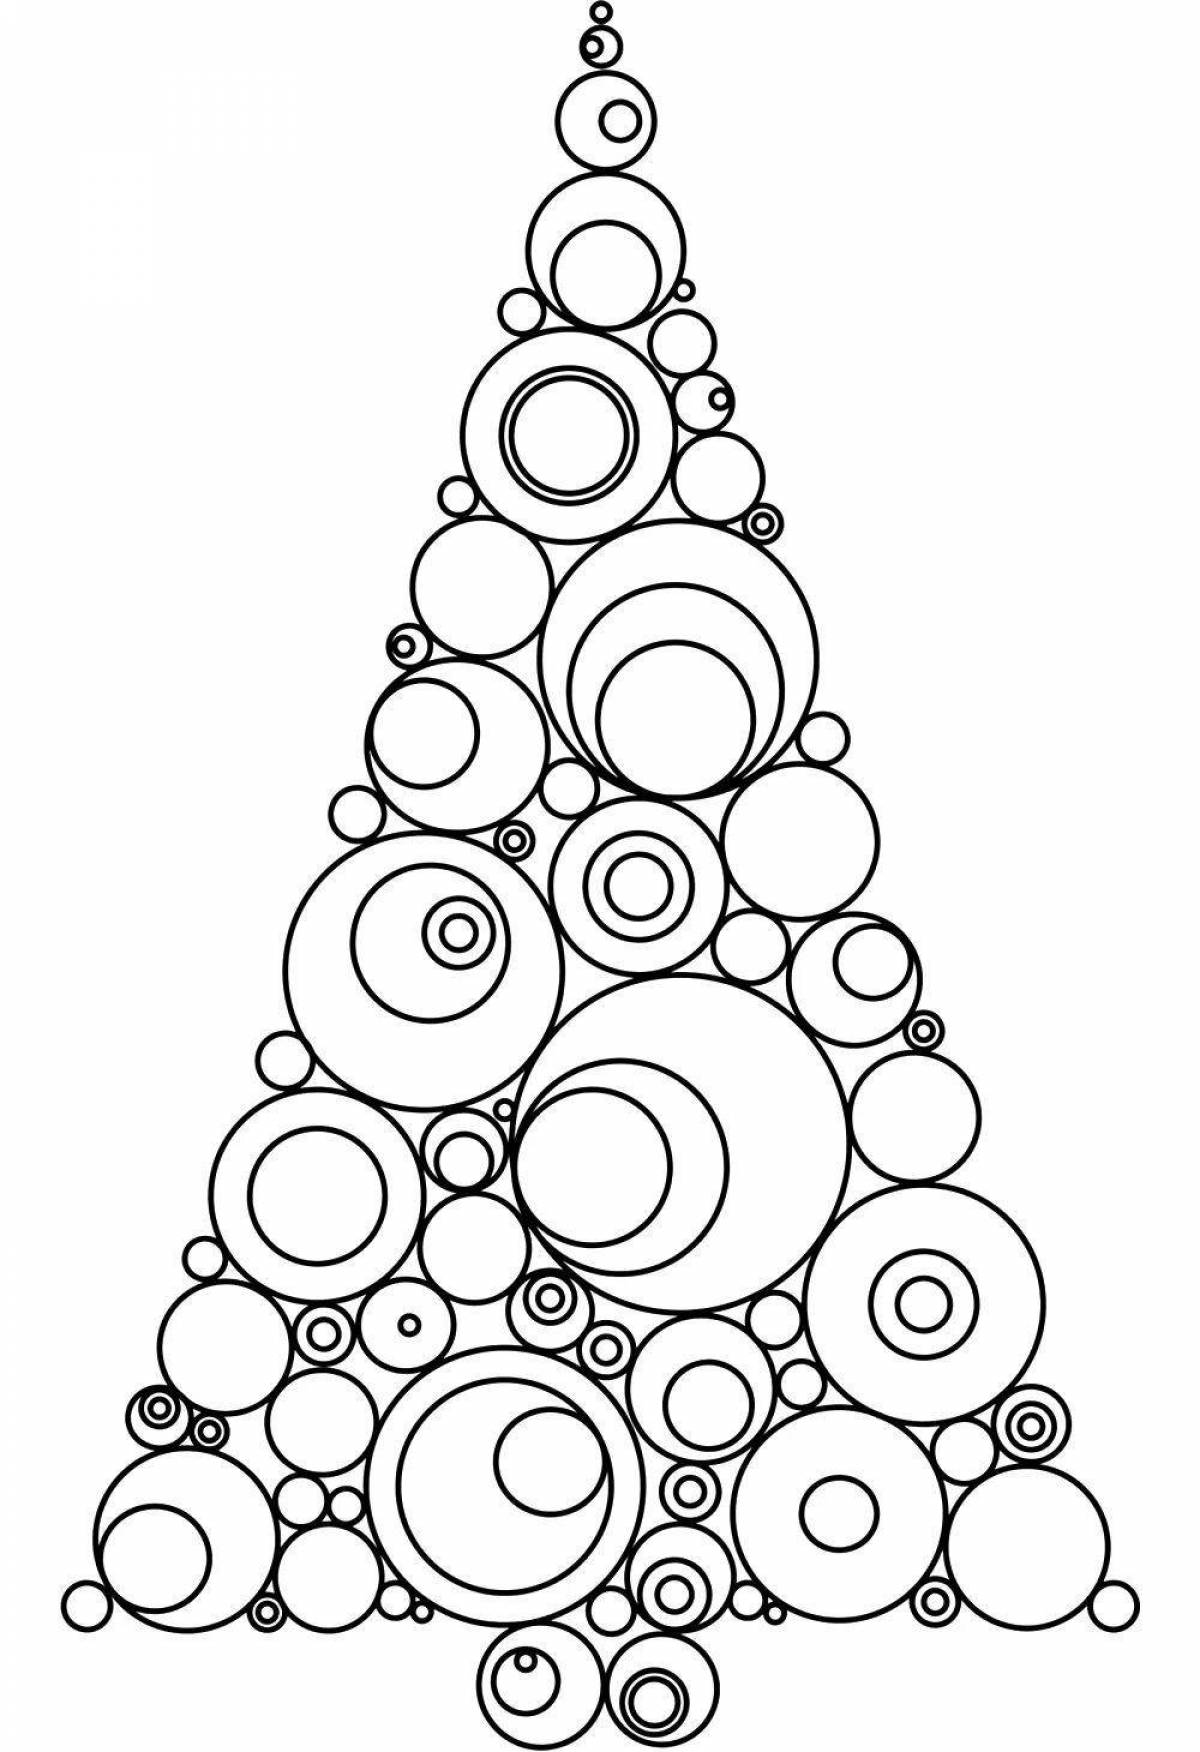 Colorful Christmas tree coloring book with balls